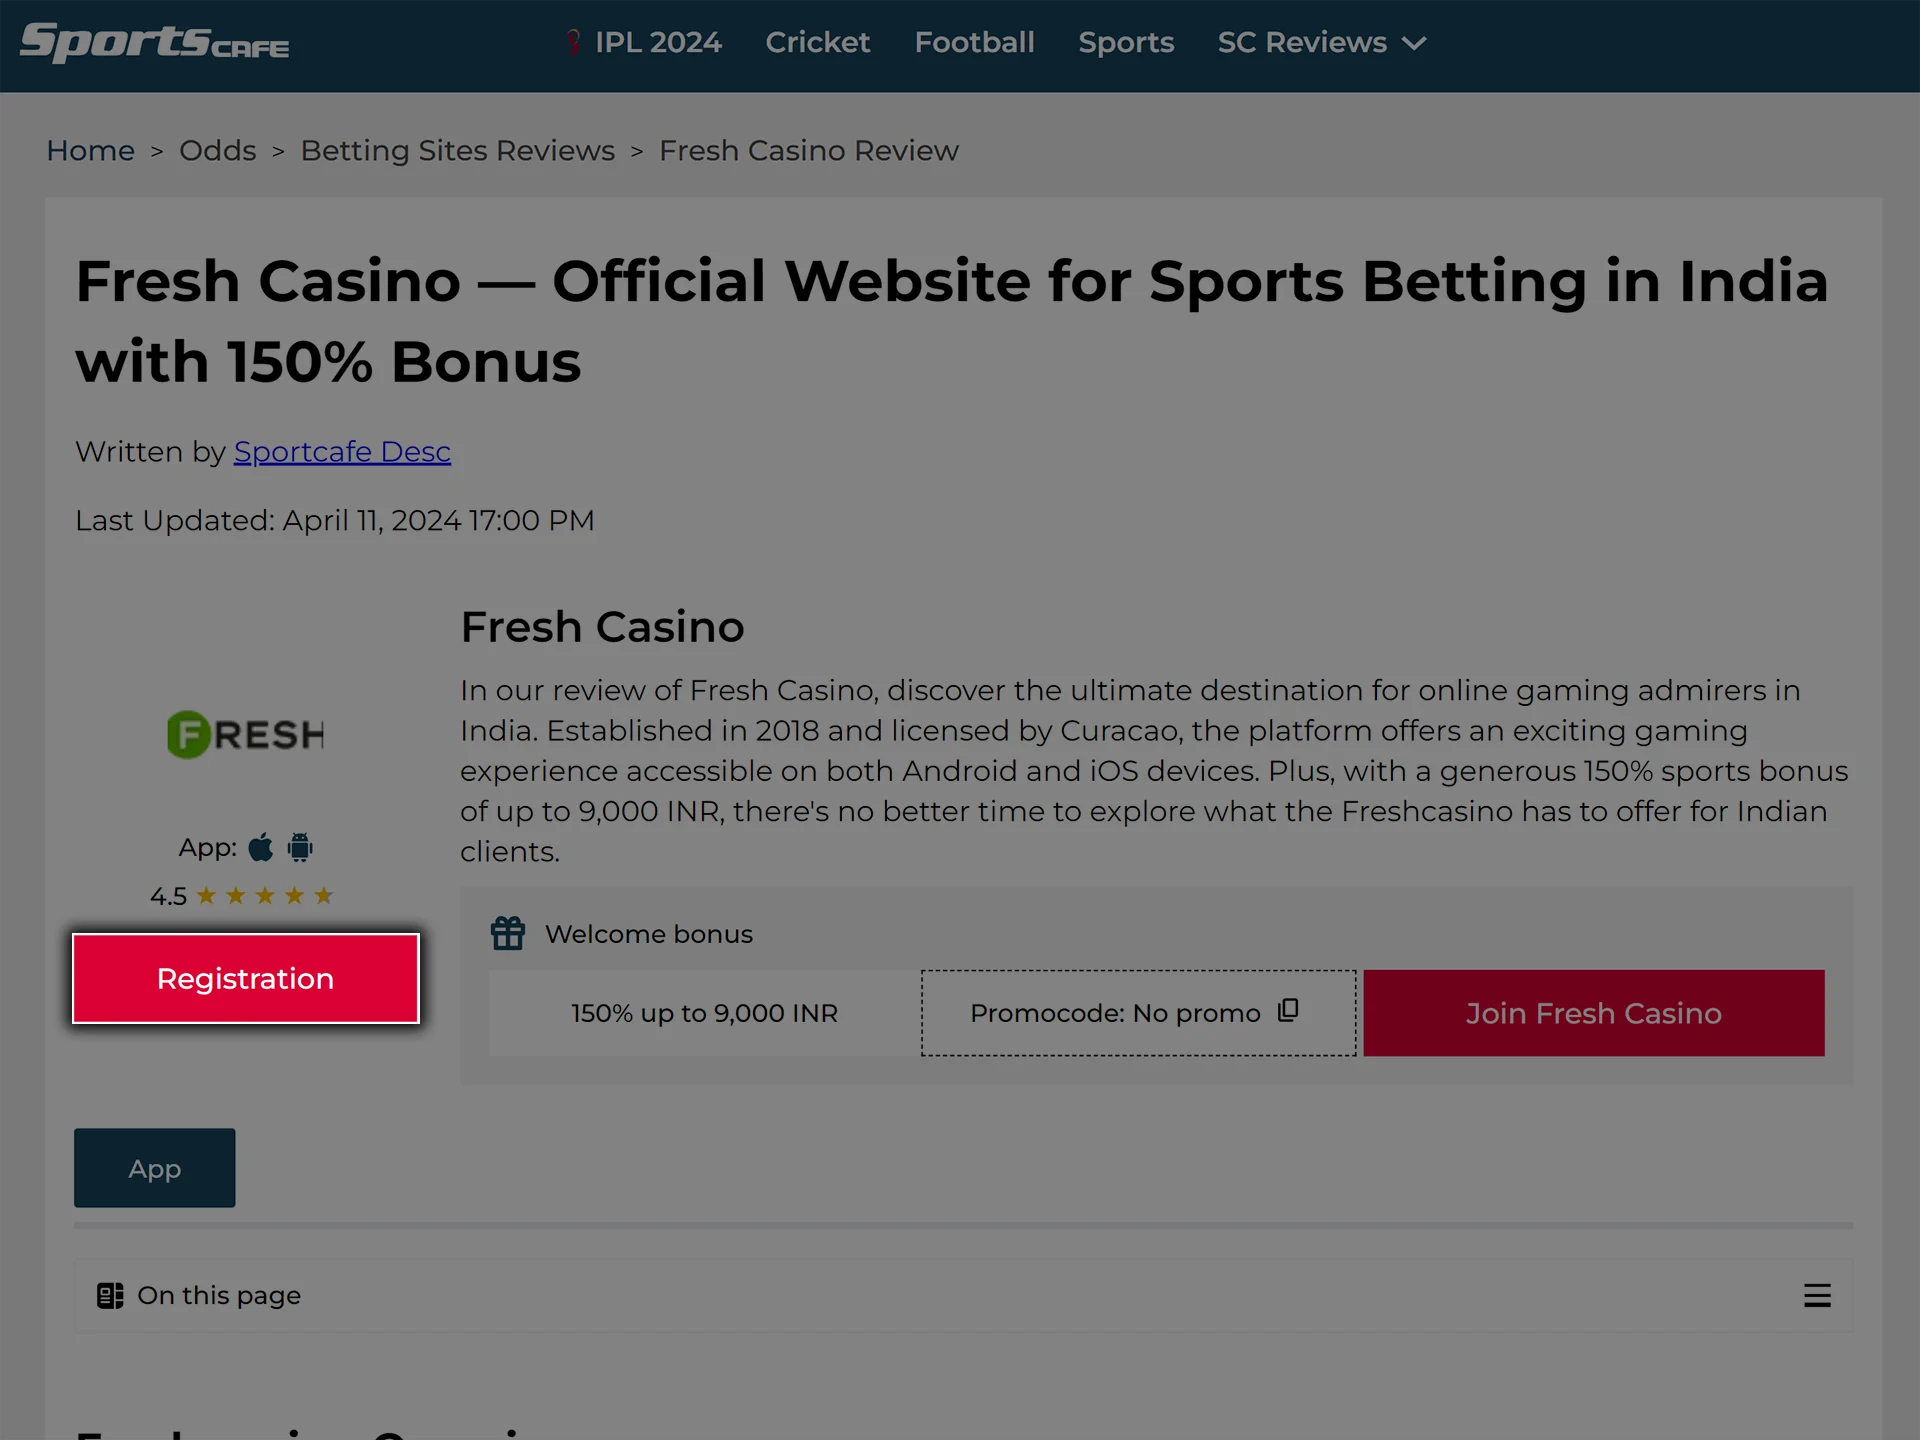 Use the link to open the official Fresh Casino website.